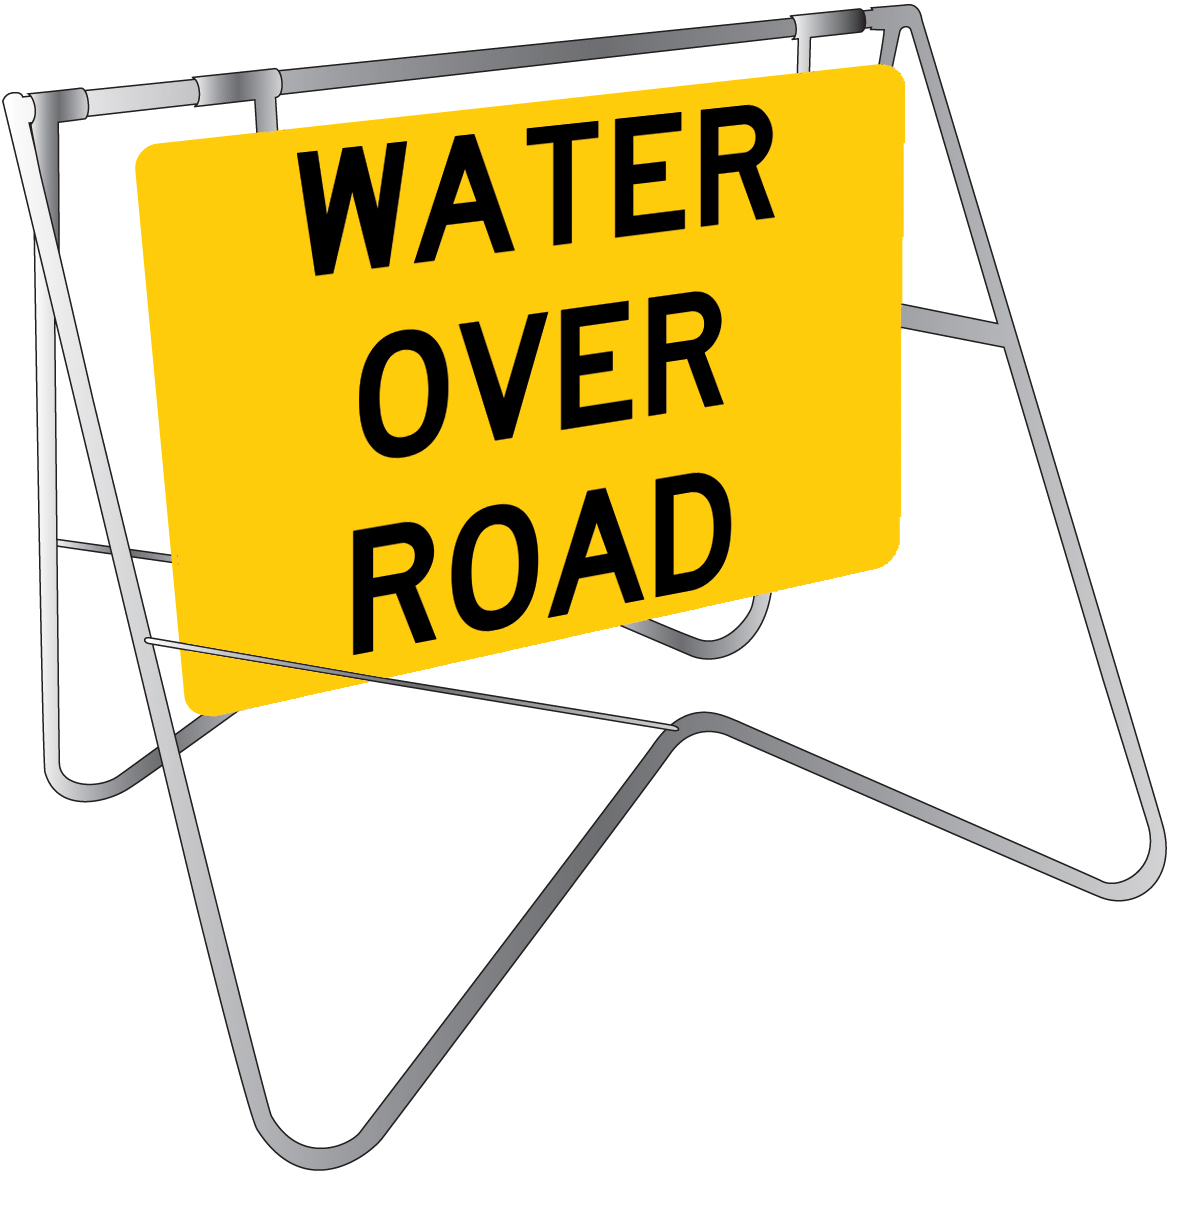 UNIFORM SAFETY 900X600MM CL1 METAL WATER OVER ROAD 